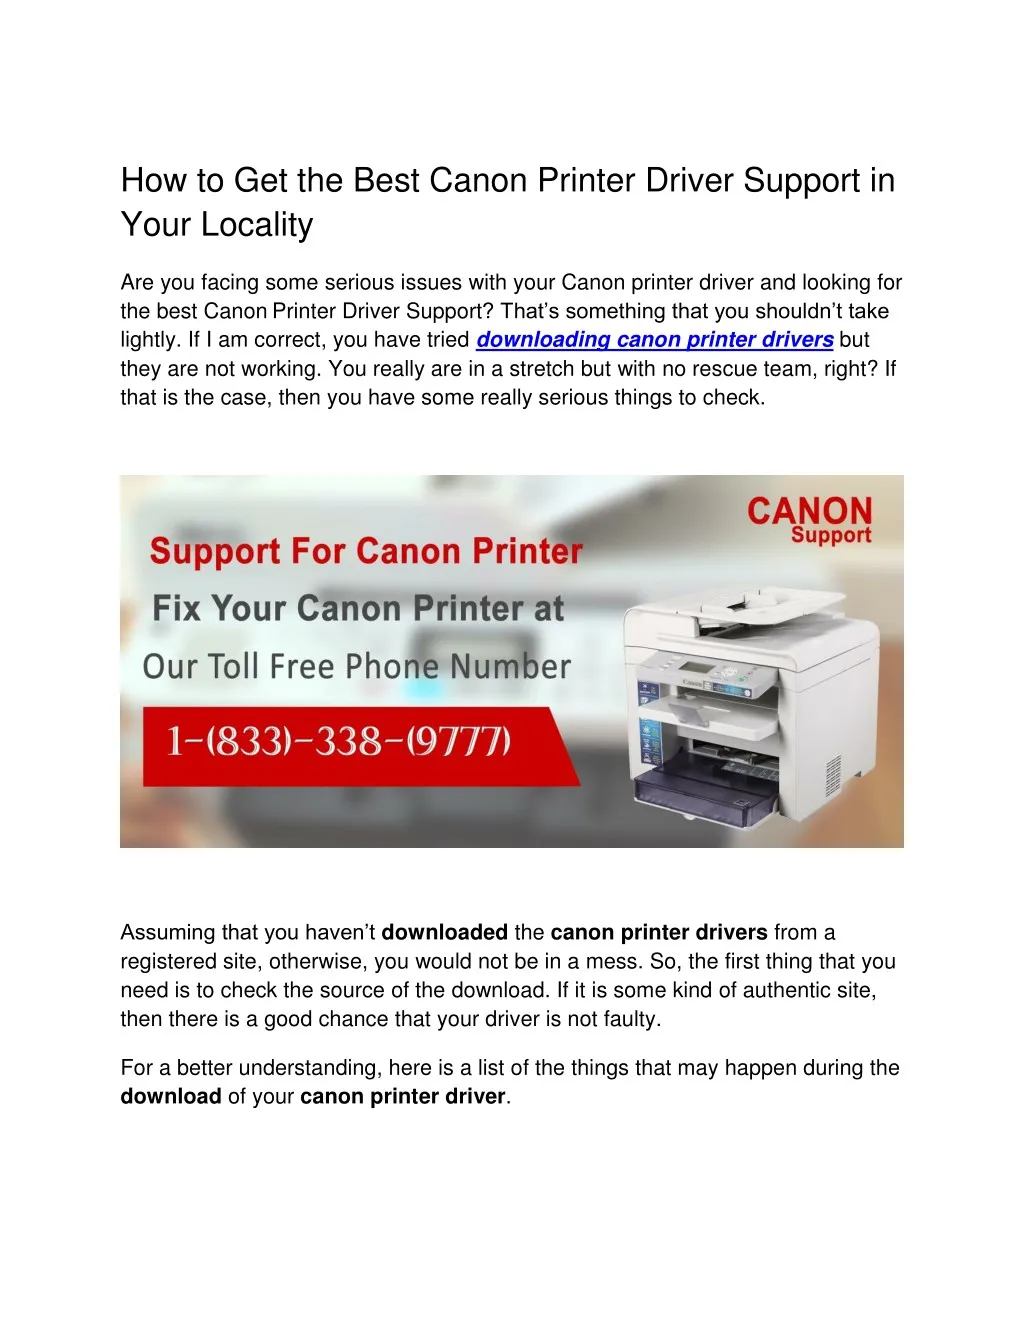 how to get the best canon printer driver support